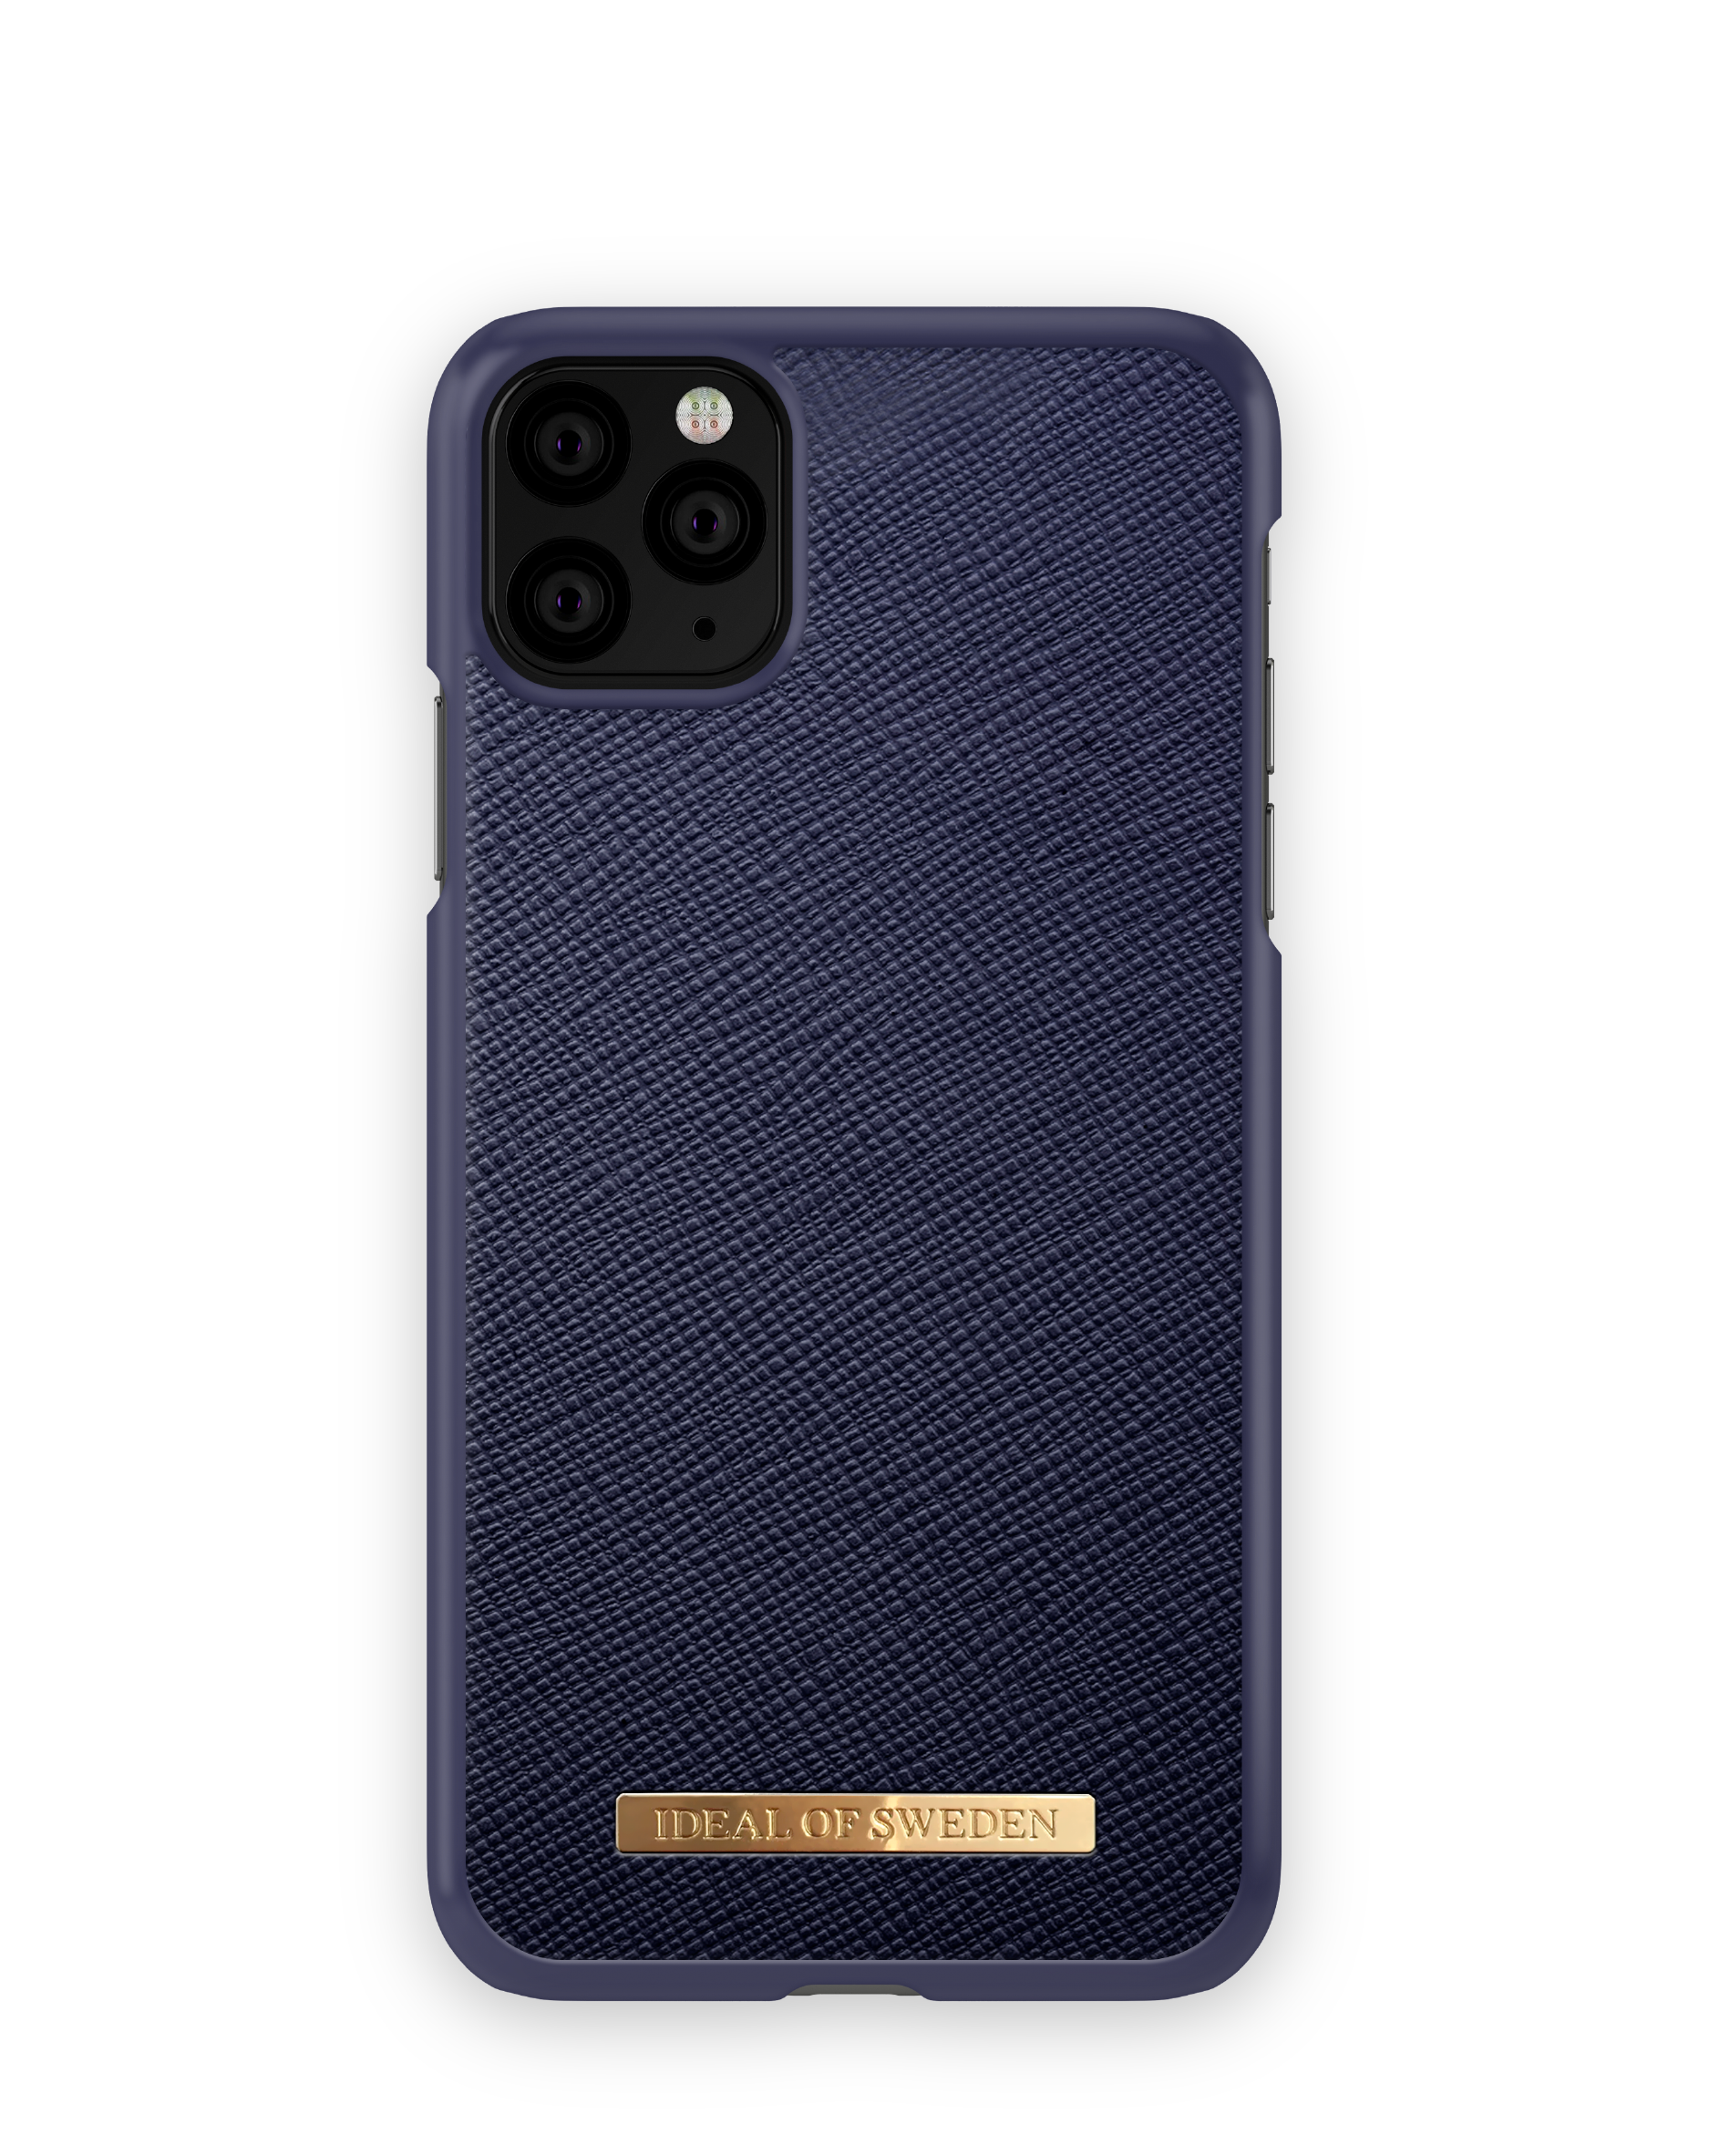 Pro Apple, IDFCSA-I1965-50, iPhone Apple Max, Navy SWEDEN iPhone Max, XS Backcover, Apple OF IDEAL 11